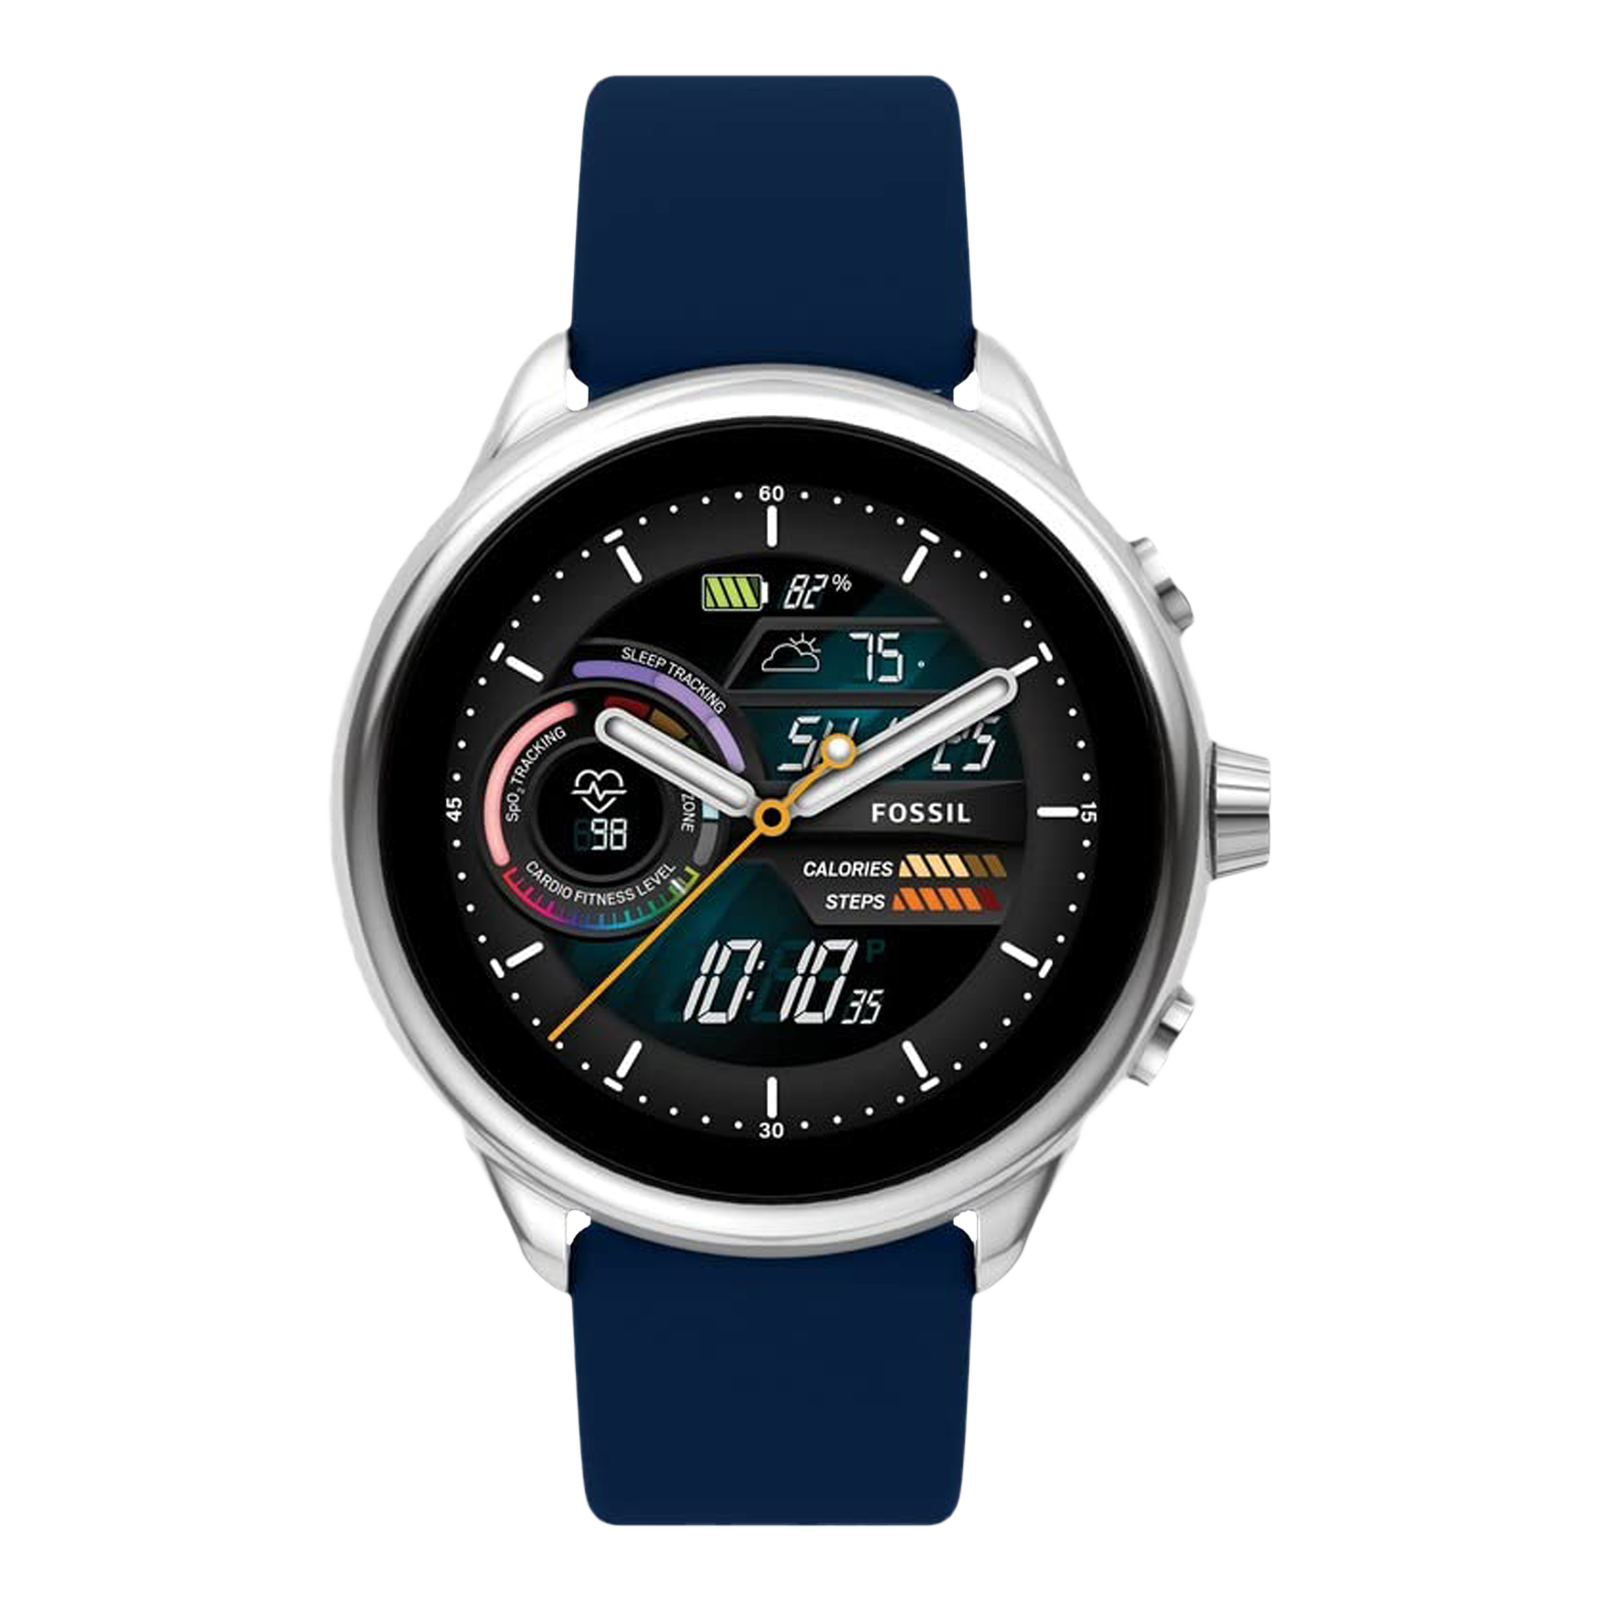 Fossil Gen 6 Wellness Edition Smartwatch with Activity Tracker (32.5mm Color AMOLED Display, 3ATM Water Resistant, Blue Strap)_1